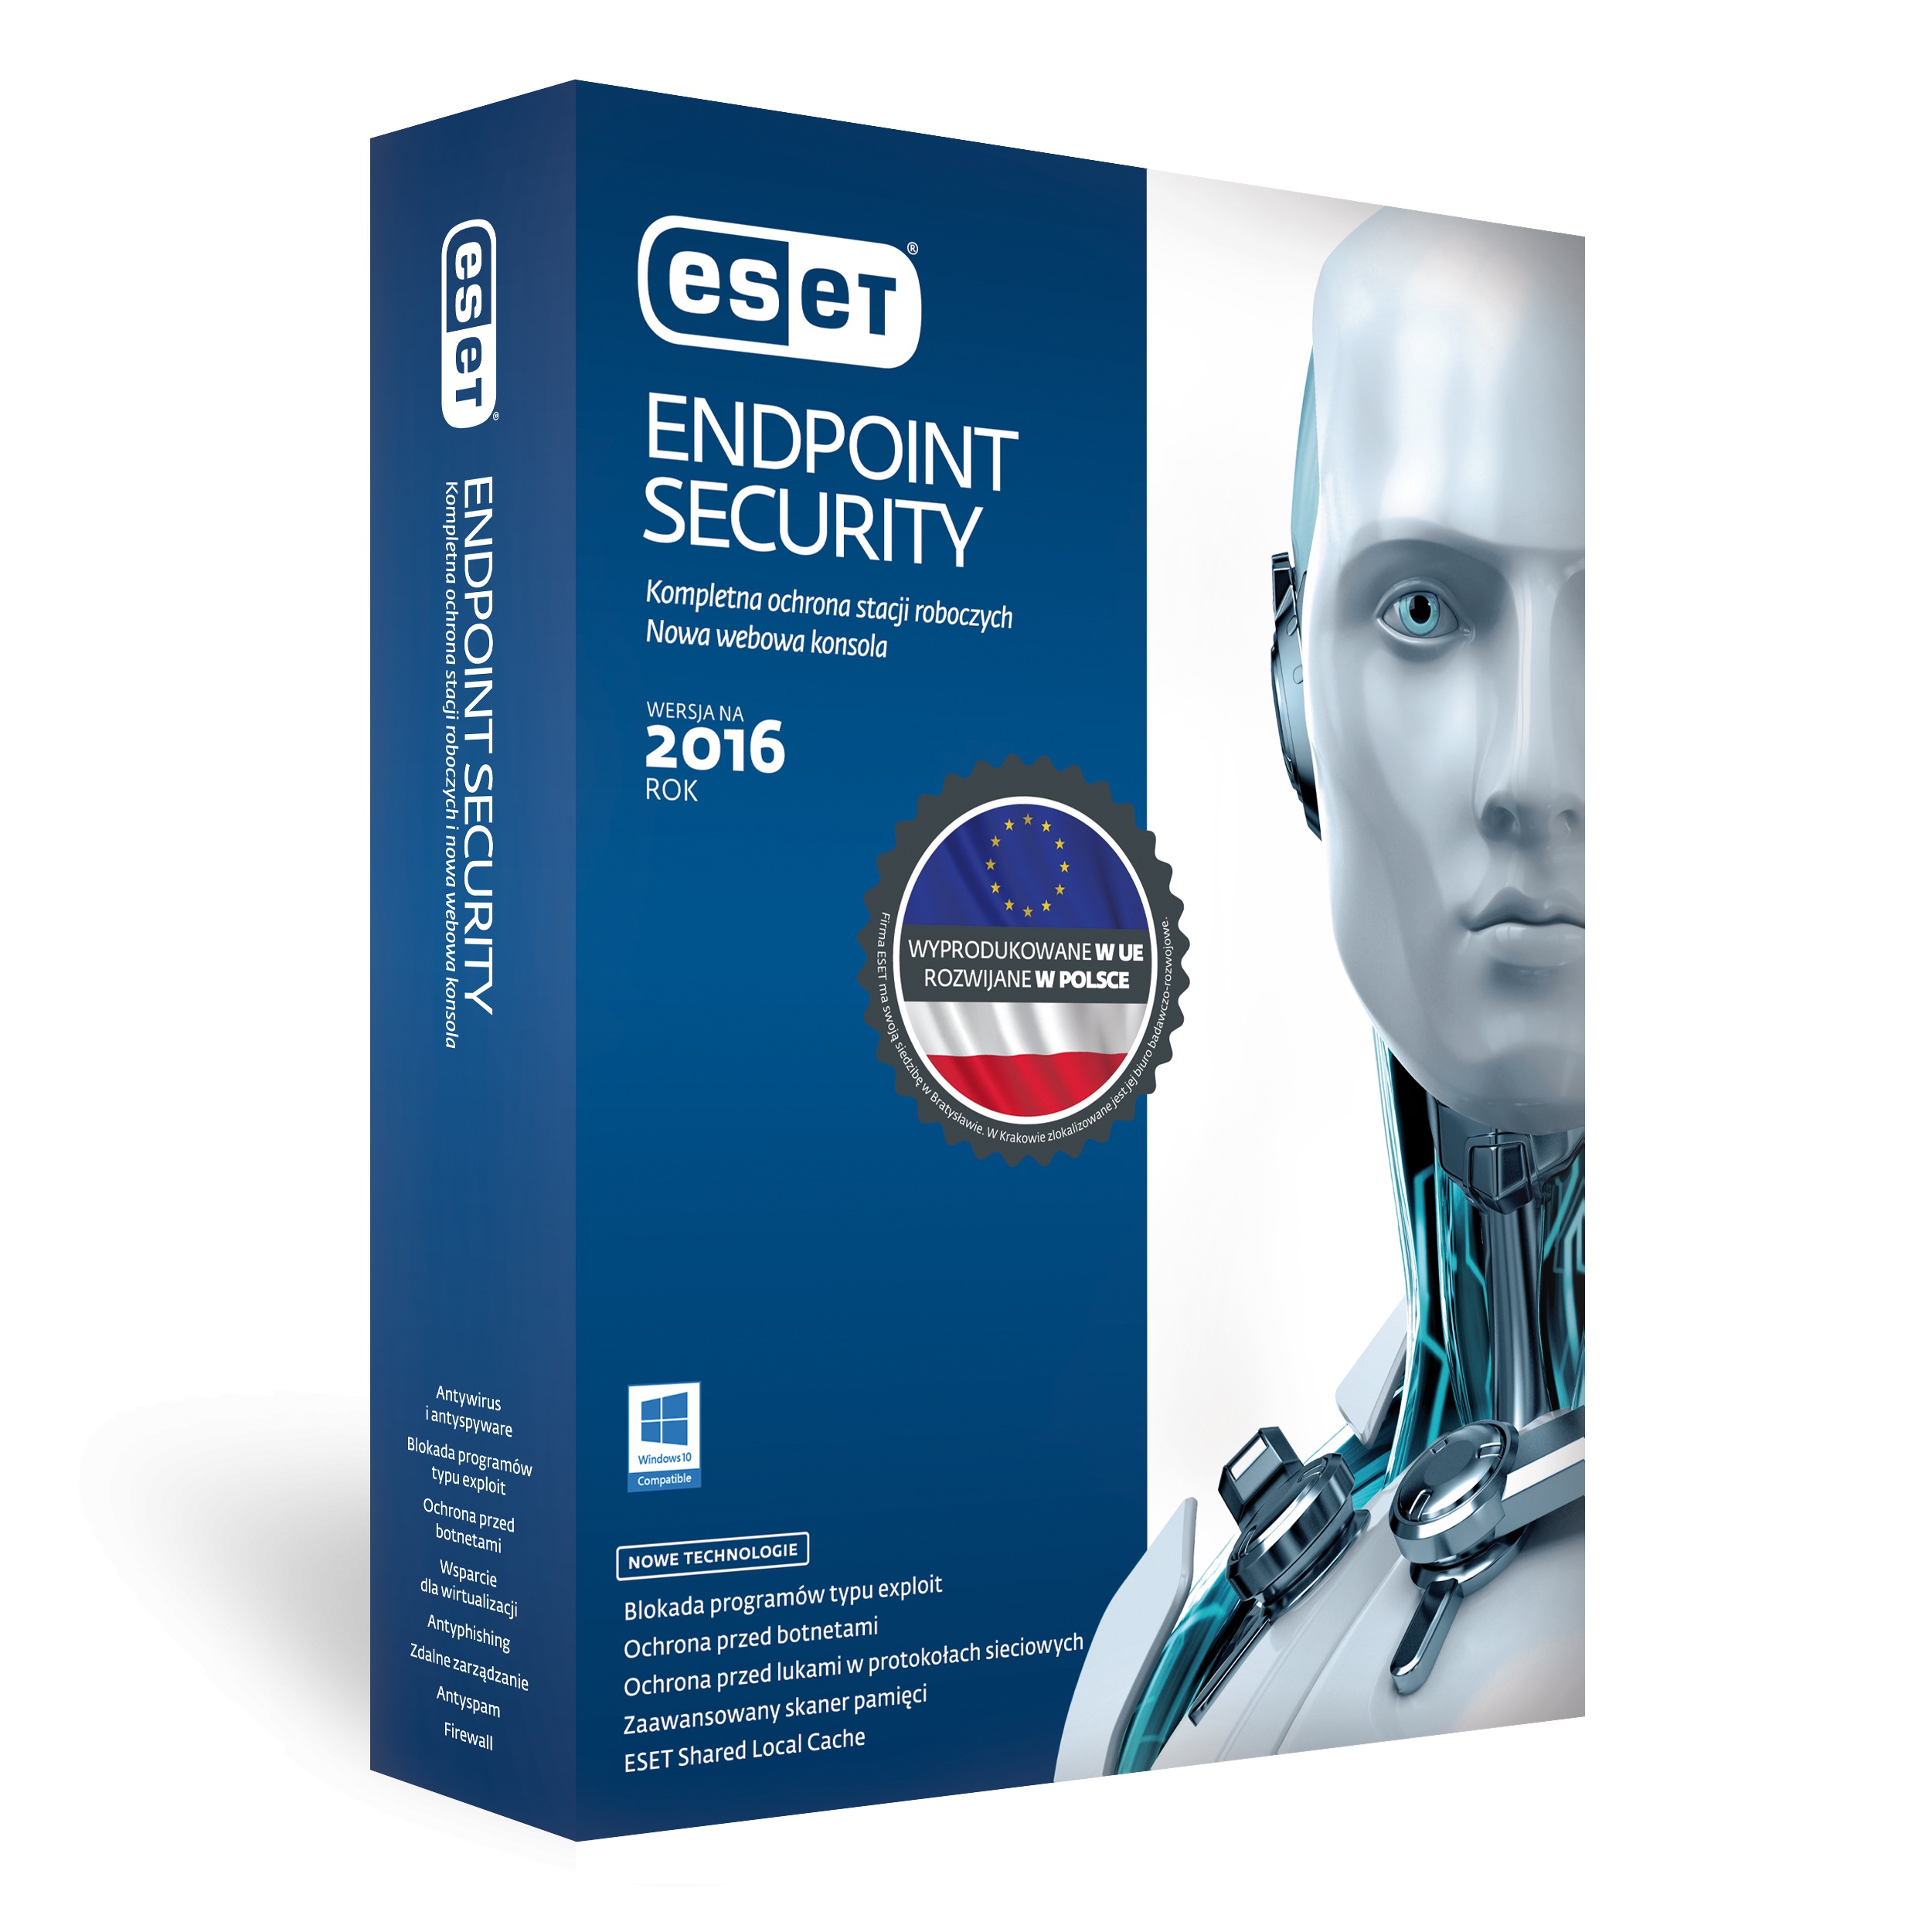 download the new version for iphoneESET Endpoint Security 10.1.2050.0